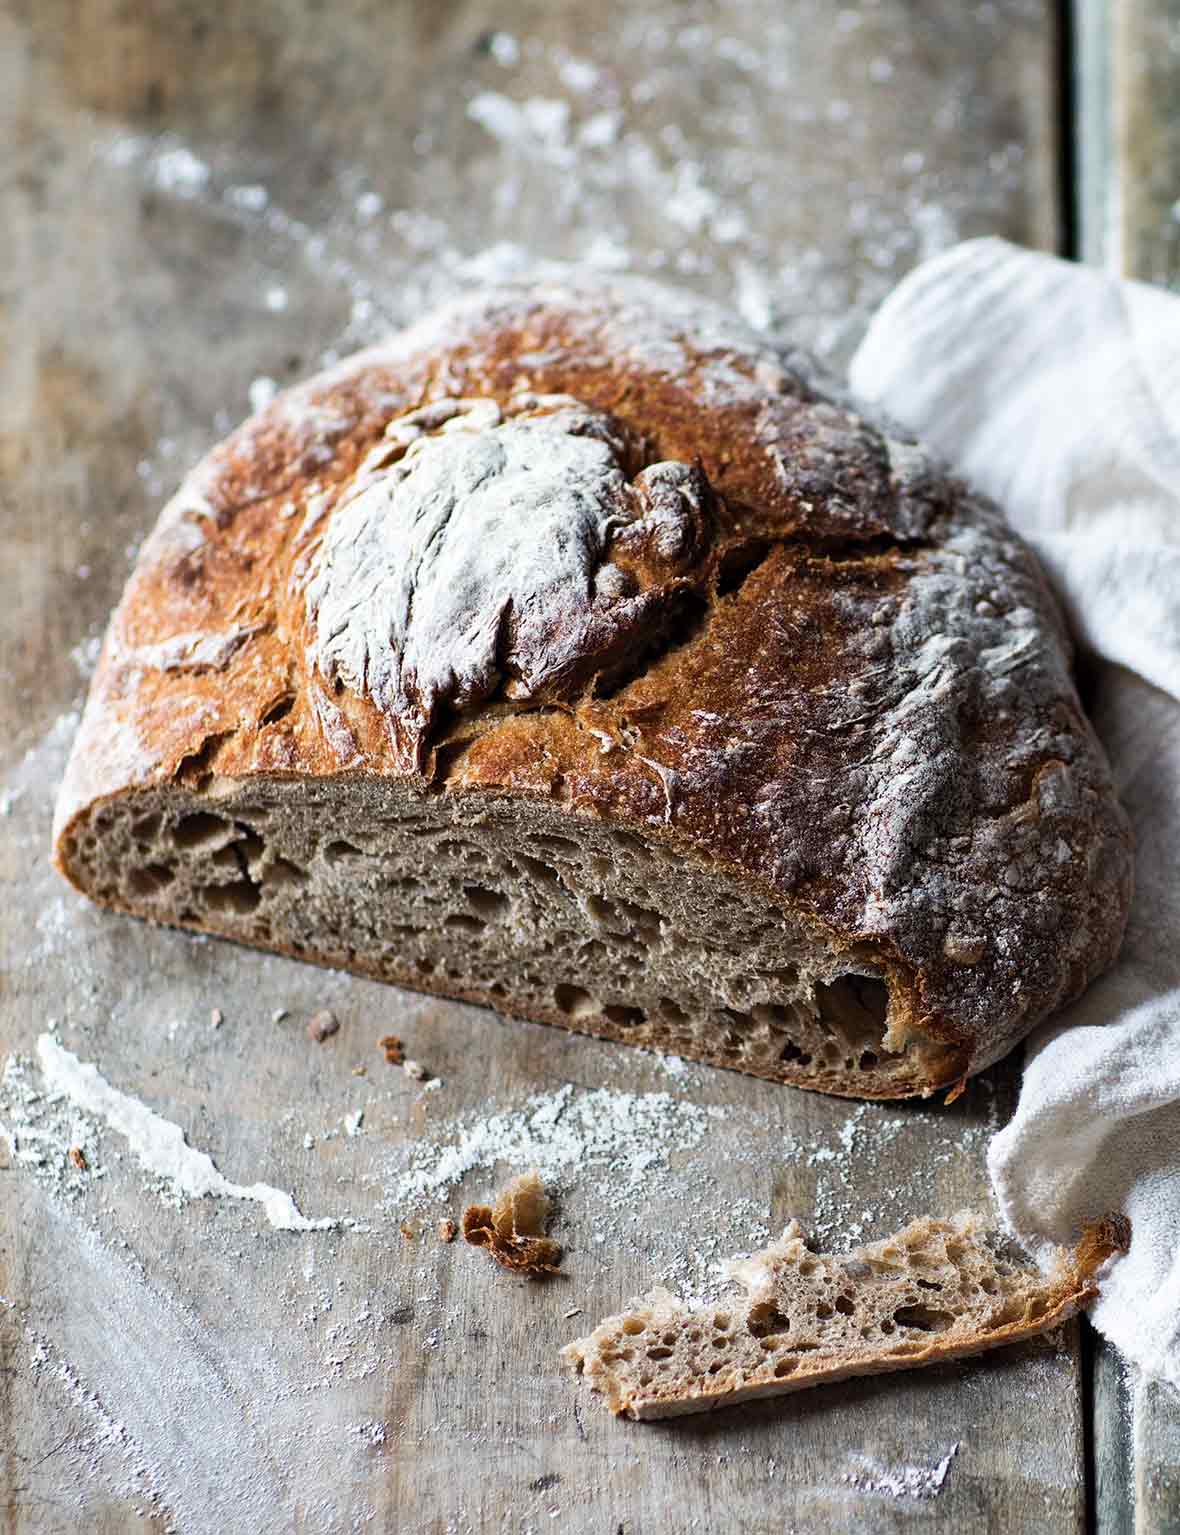 A loaf of Galician rye bread with a slice cut off to show the airy texture.